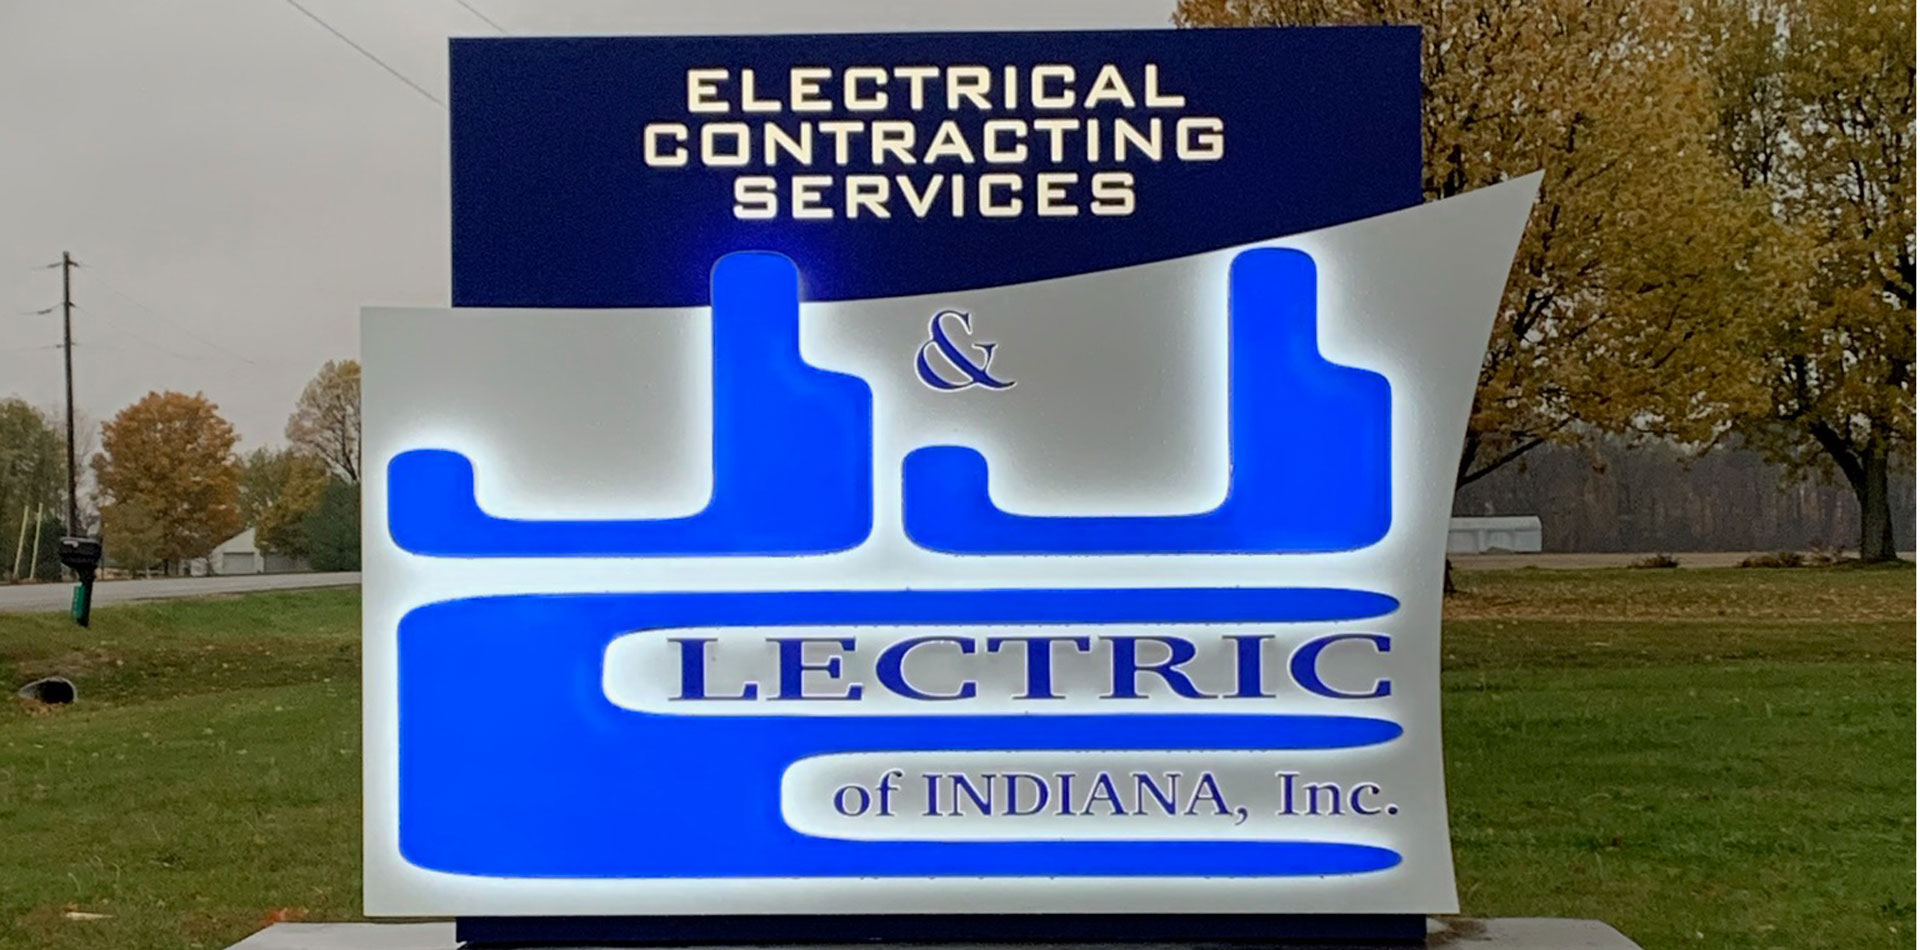 Electrical Contracting Services J & J Electric sign